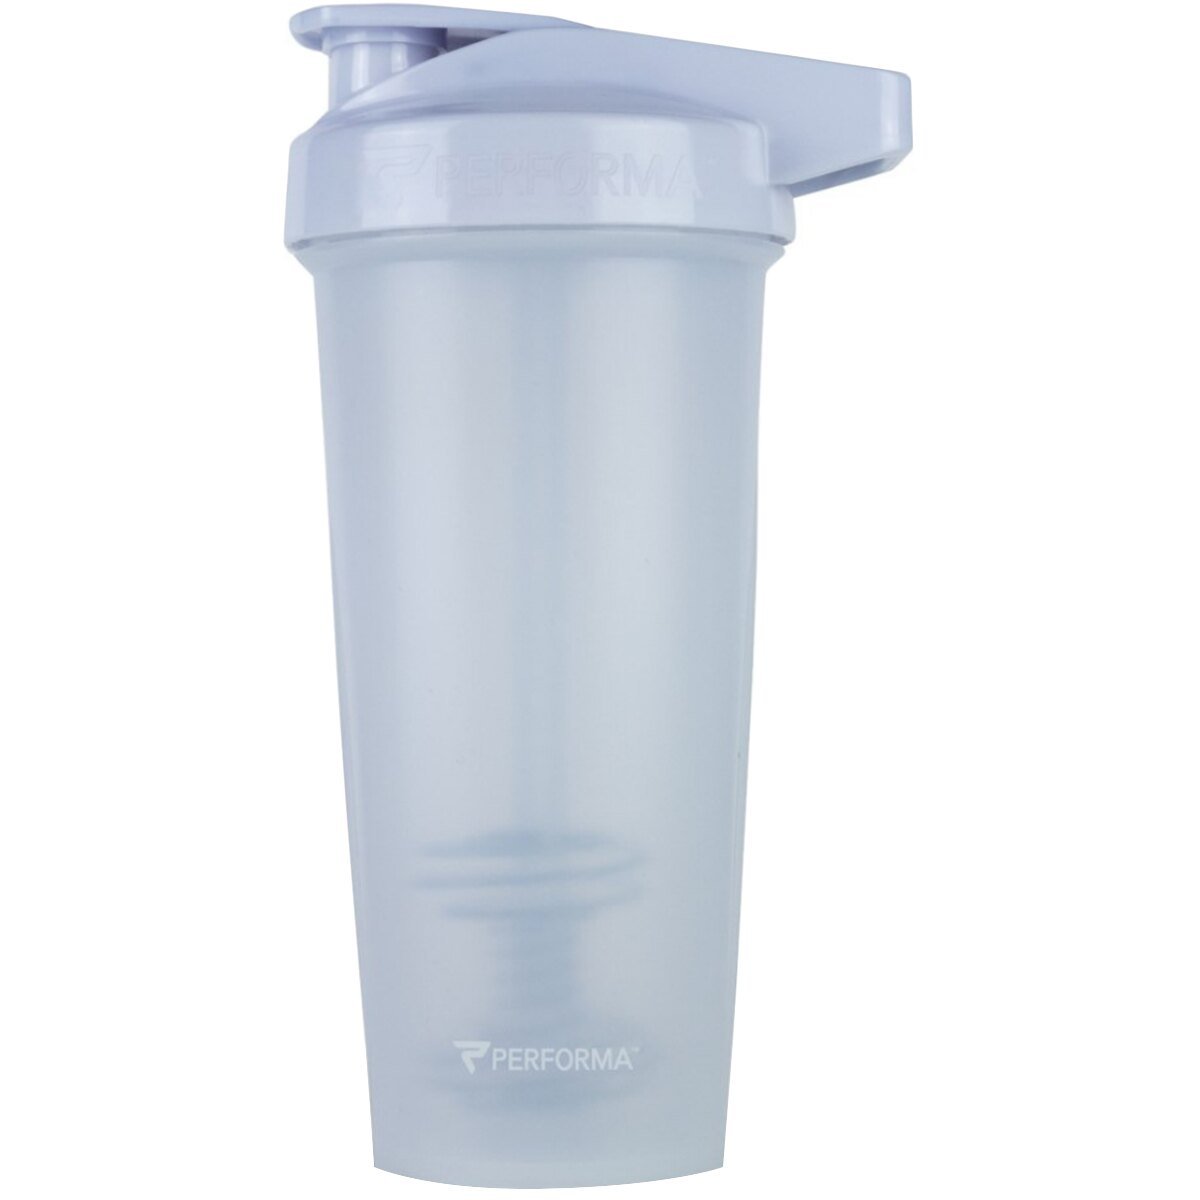 9080164 Performa Activ Classic Collection Shaker Cup, White - 28 Oz